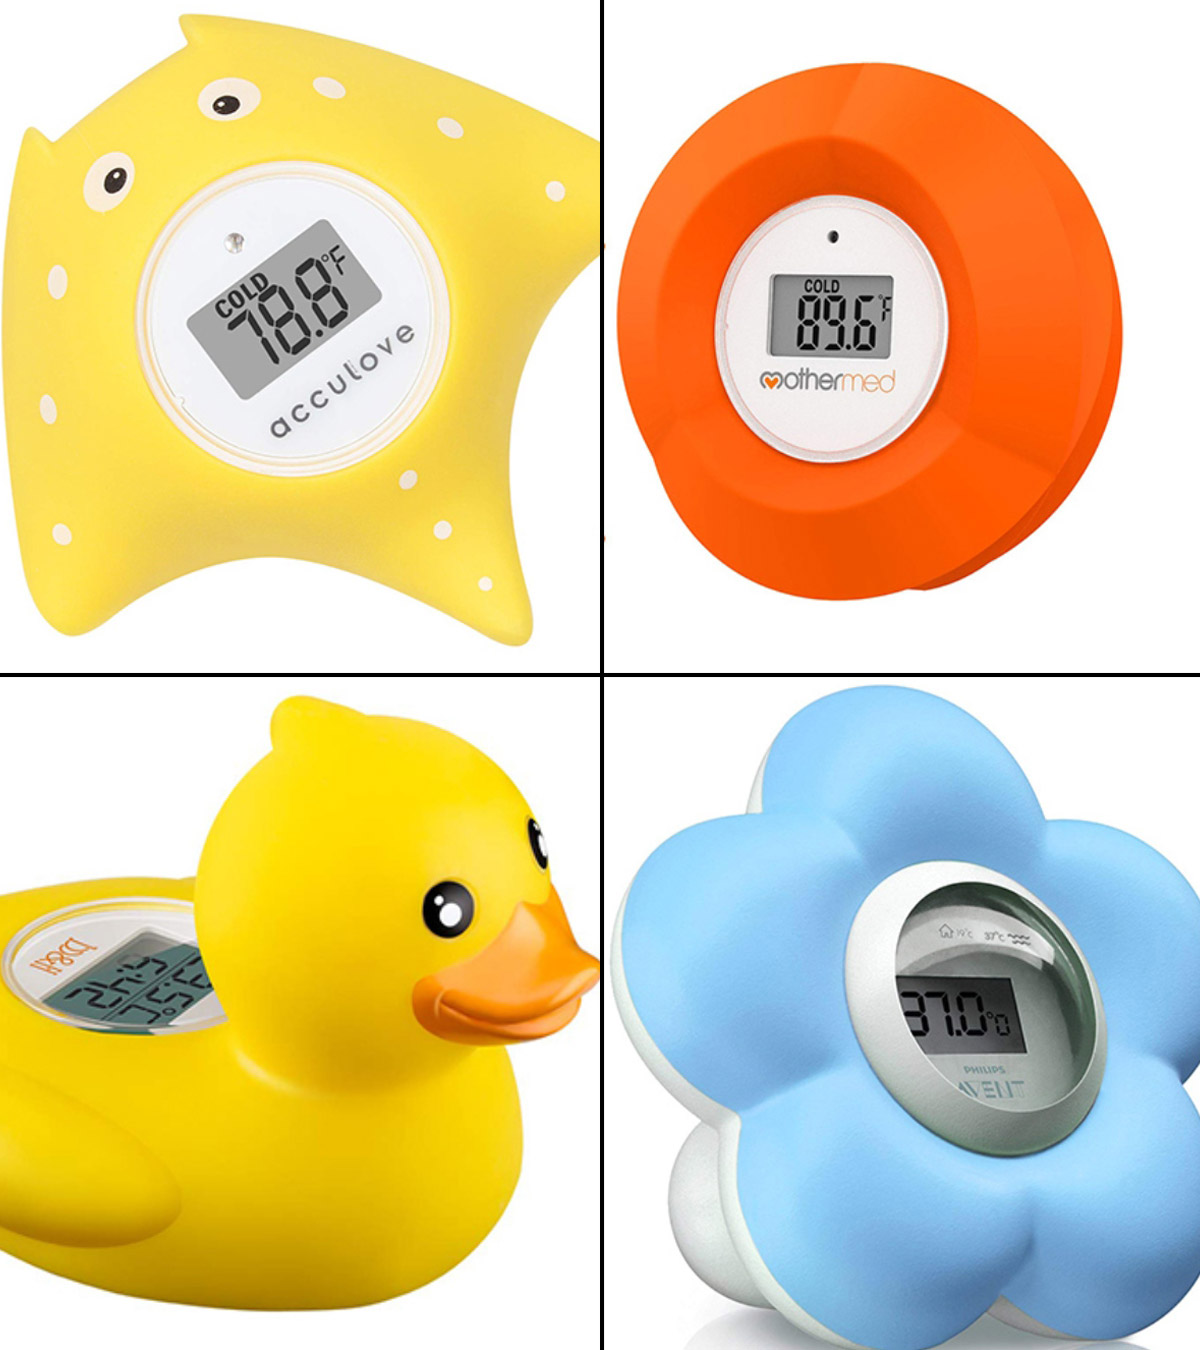 WINNIE THE POOH BABY BATH THERMOMETER TEMPERATURE SAFETY YELLOW BRAND NEW DISNEY 